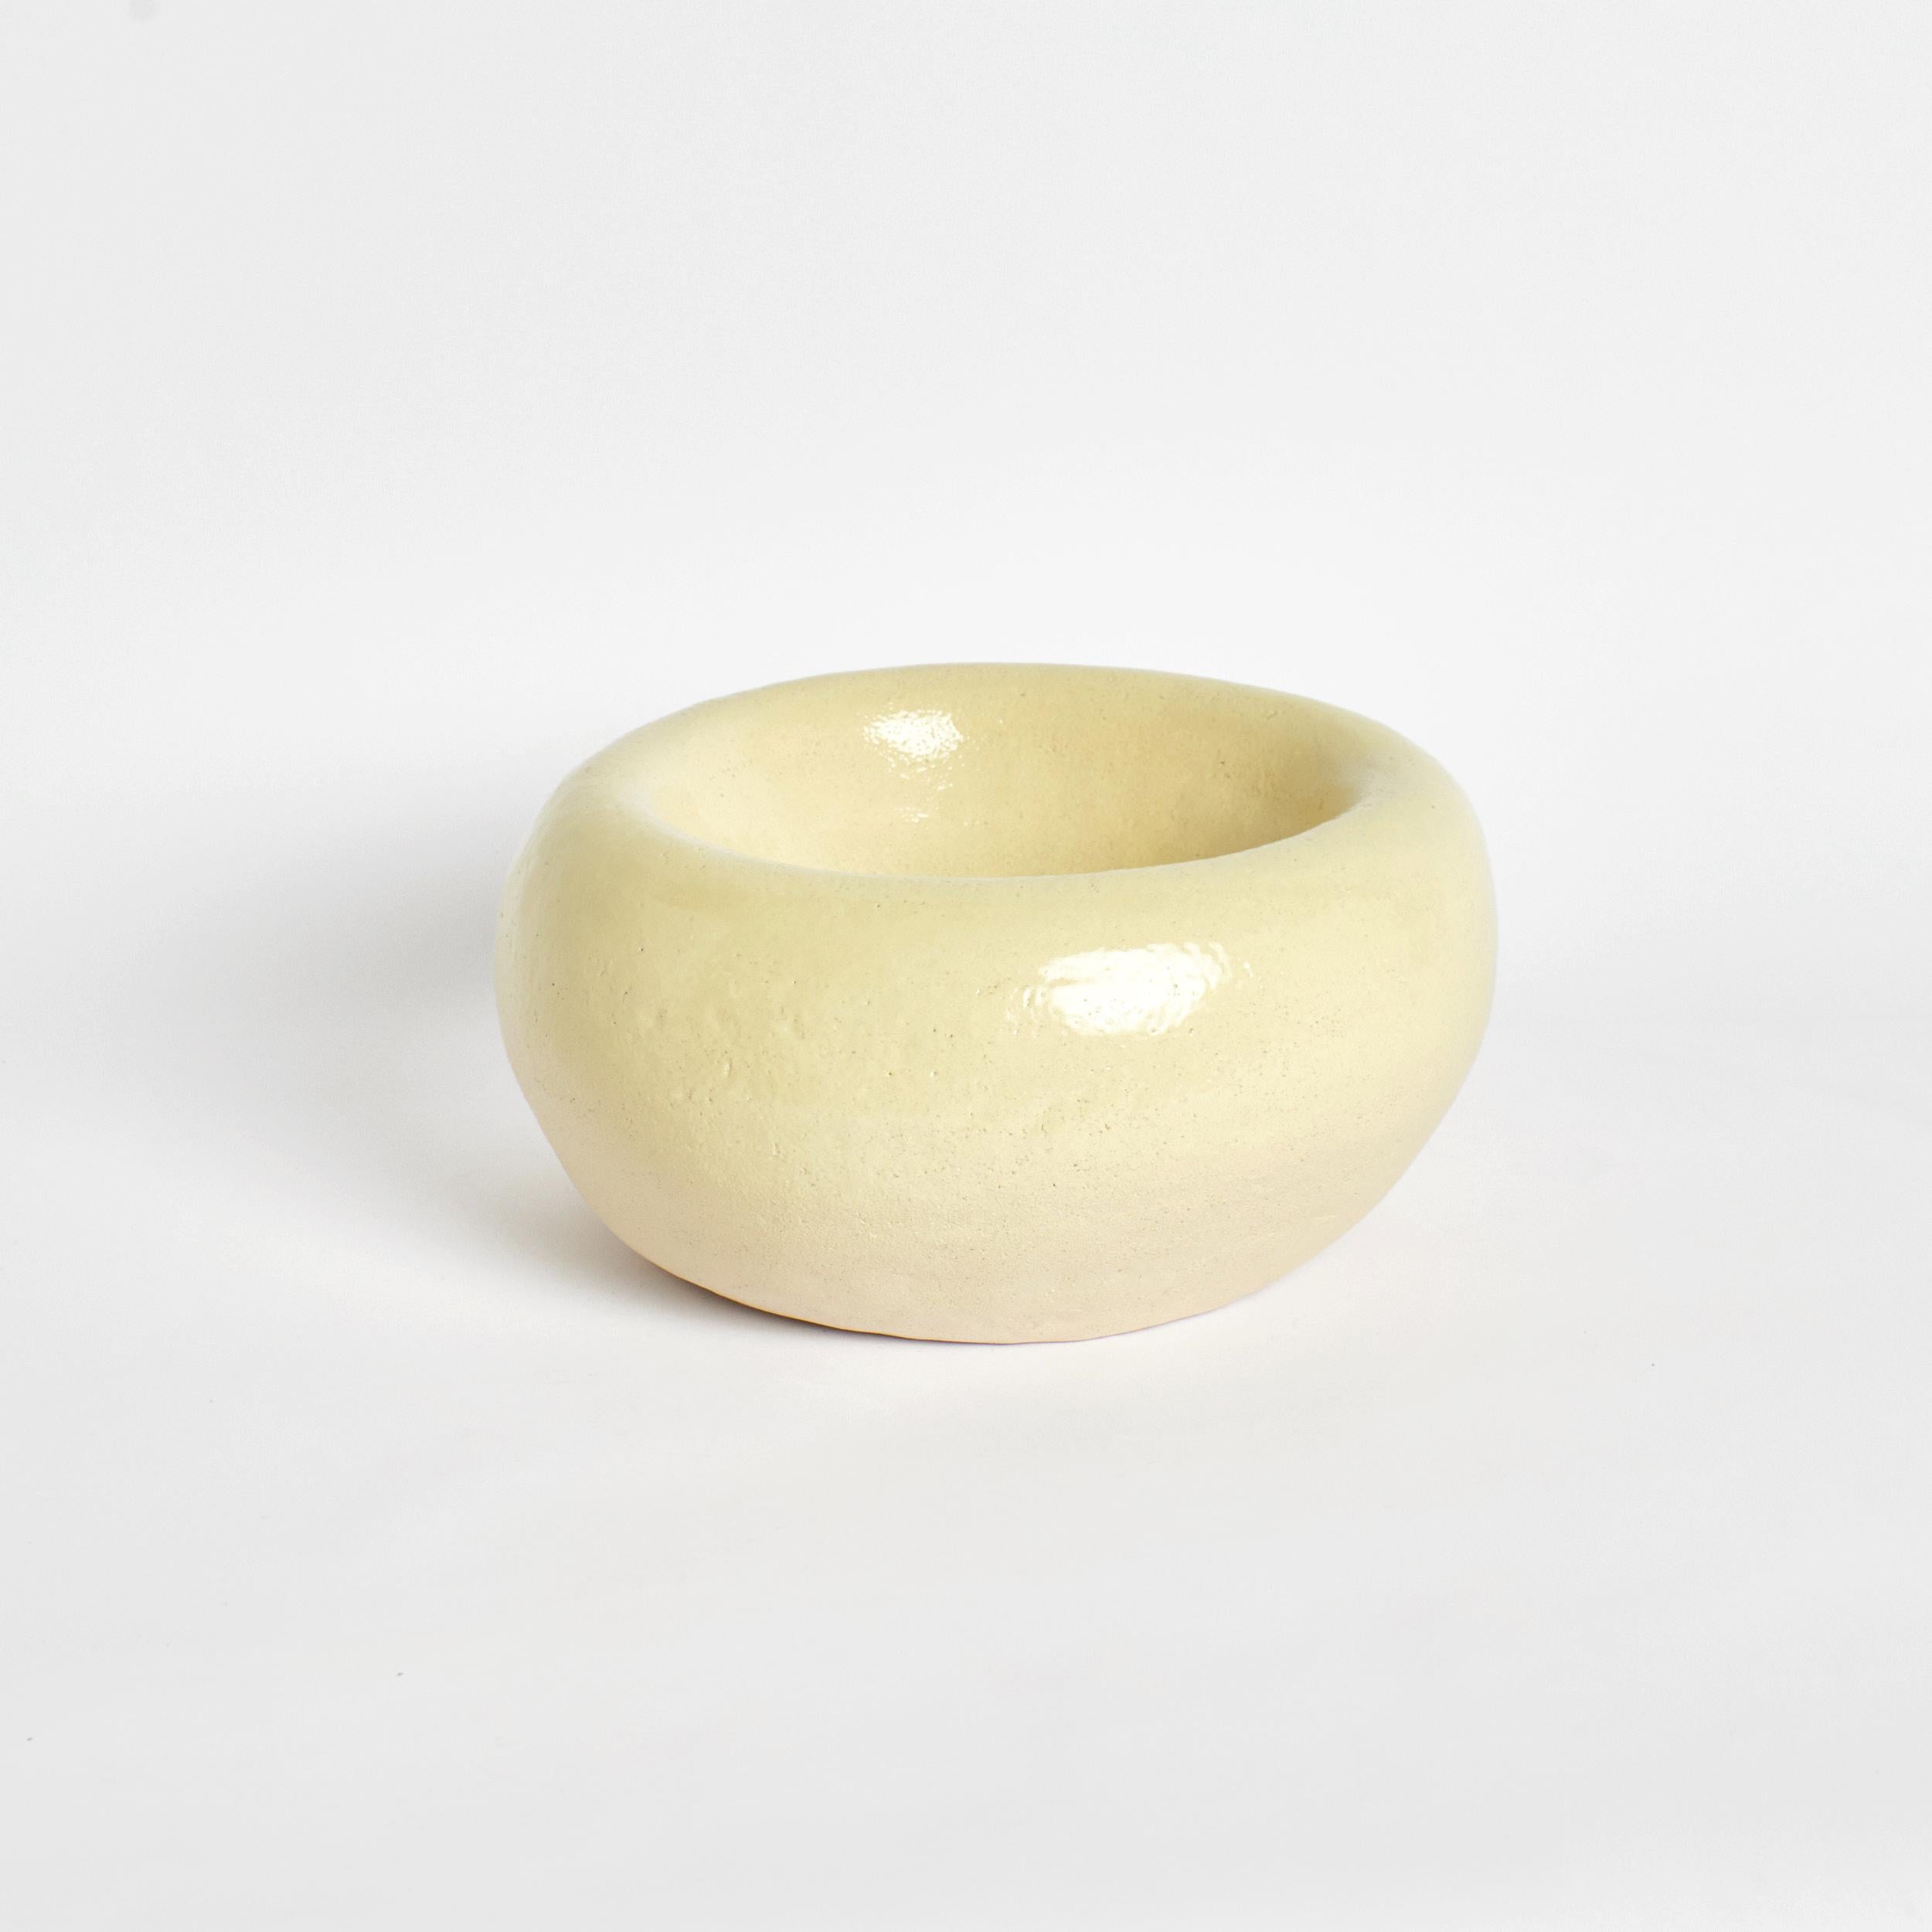 Poet bowl in yellow.
Designed by Project 213A in 2022. 

Hand-sculpted ceramic bowl with a beautiful handmade uneven shape. This extra large piece is finished with a bespoke soft yellow glaze and hallmarked with Project 213A.


Delivery
We